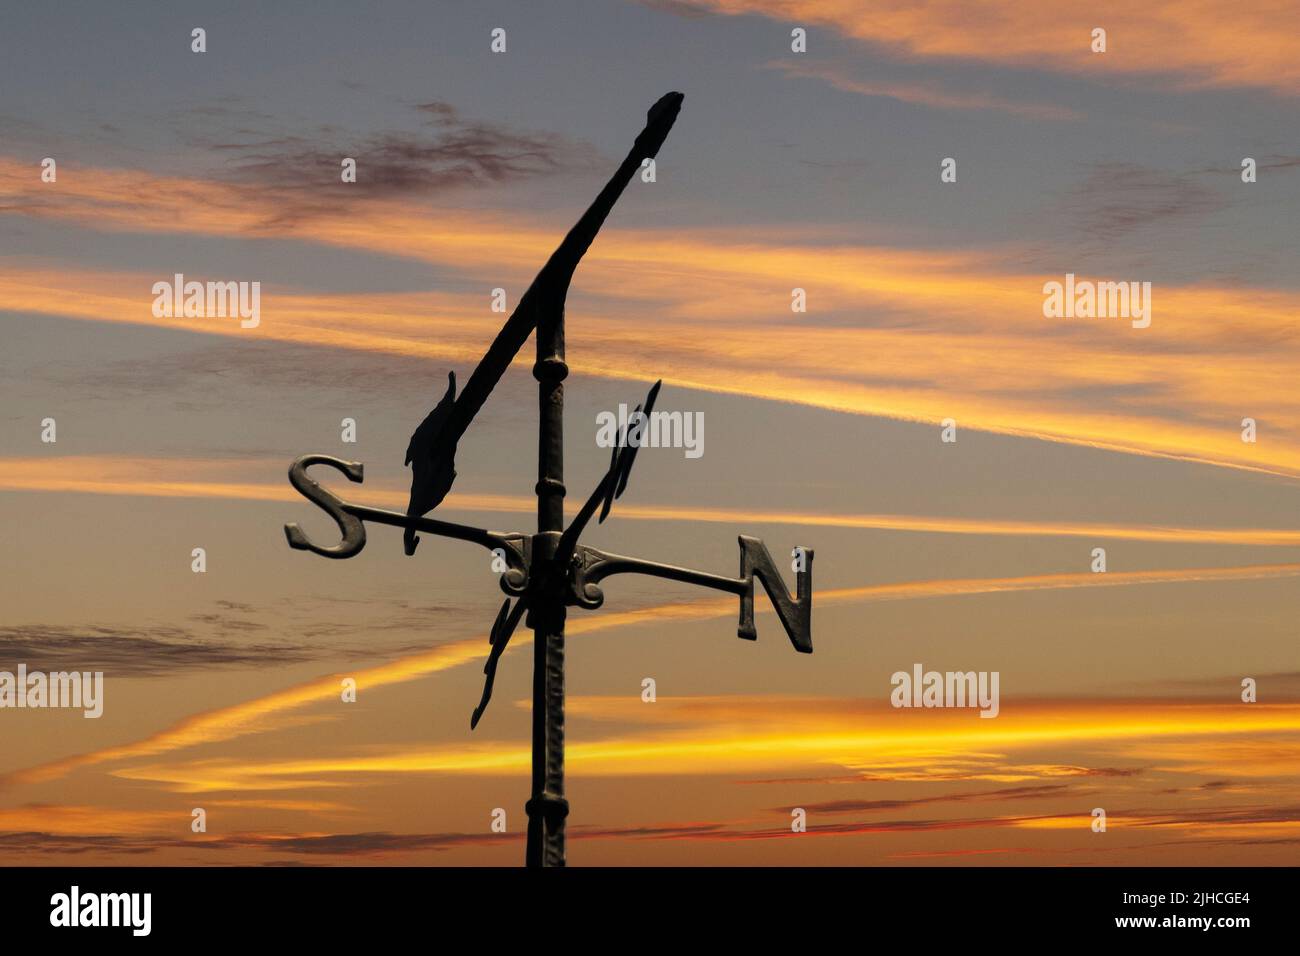 A weather vane points to the west with a sunset sky in the background in a composite image. Stock Photo